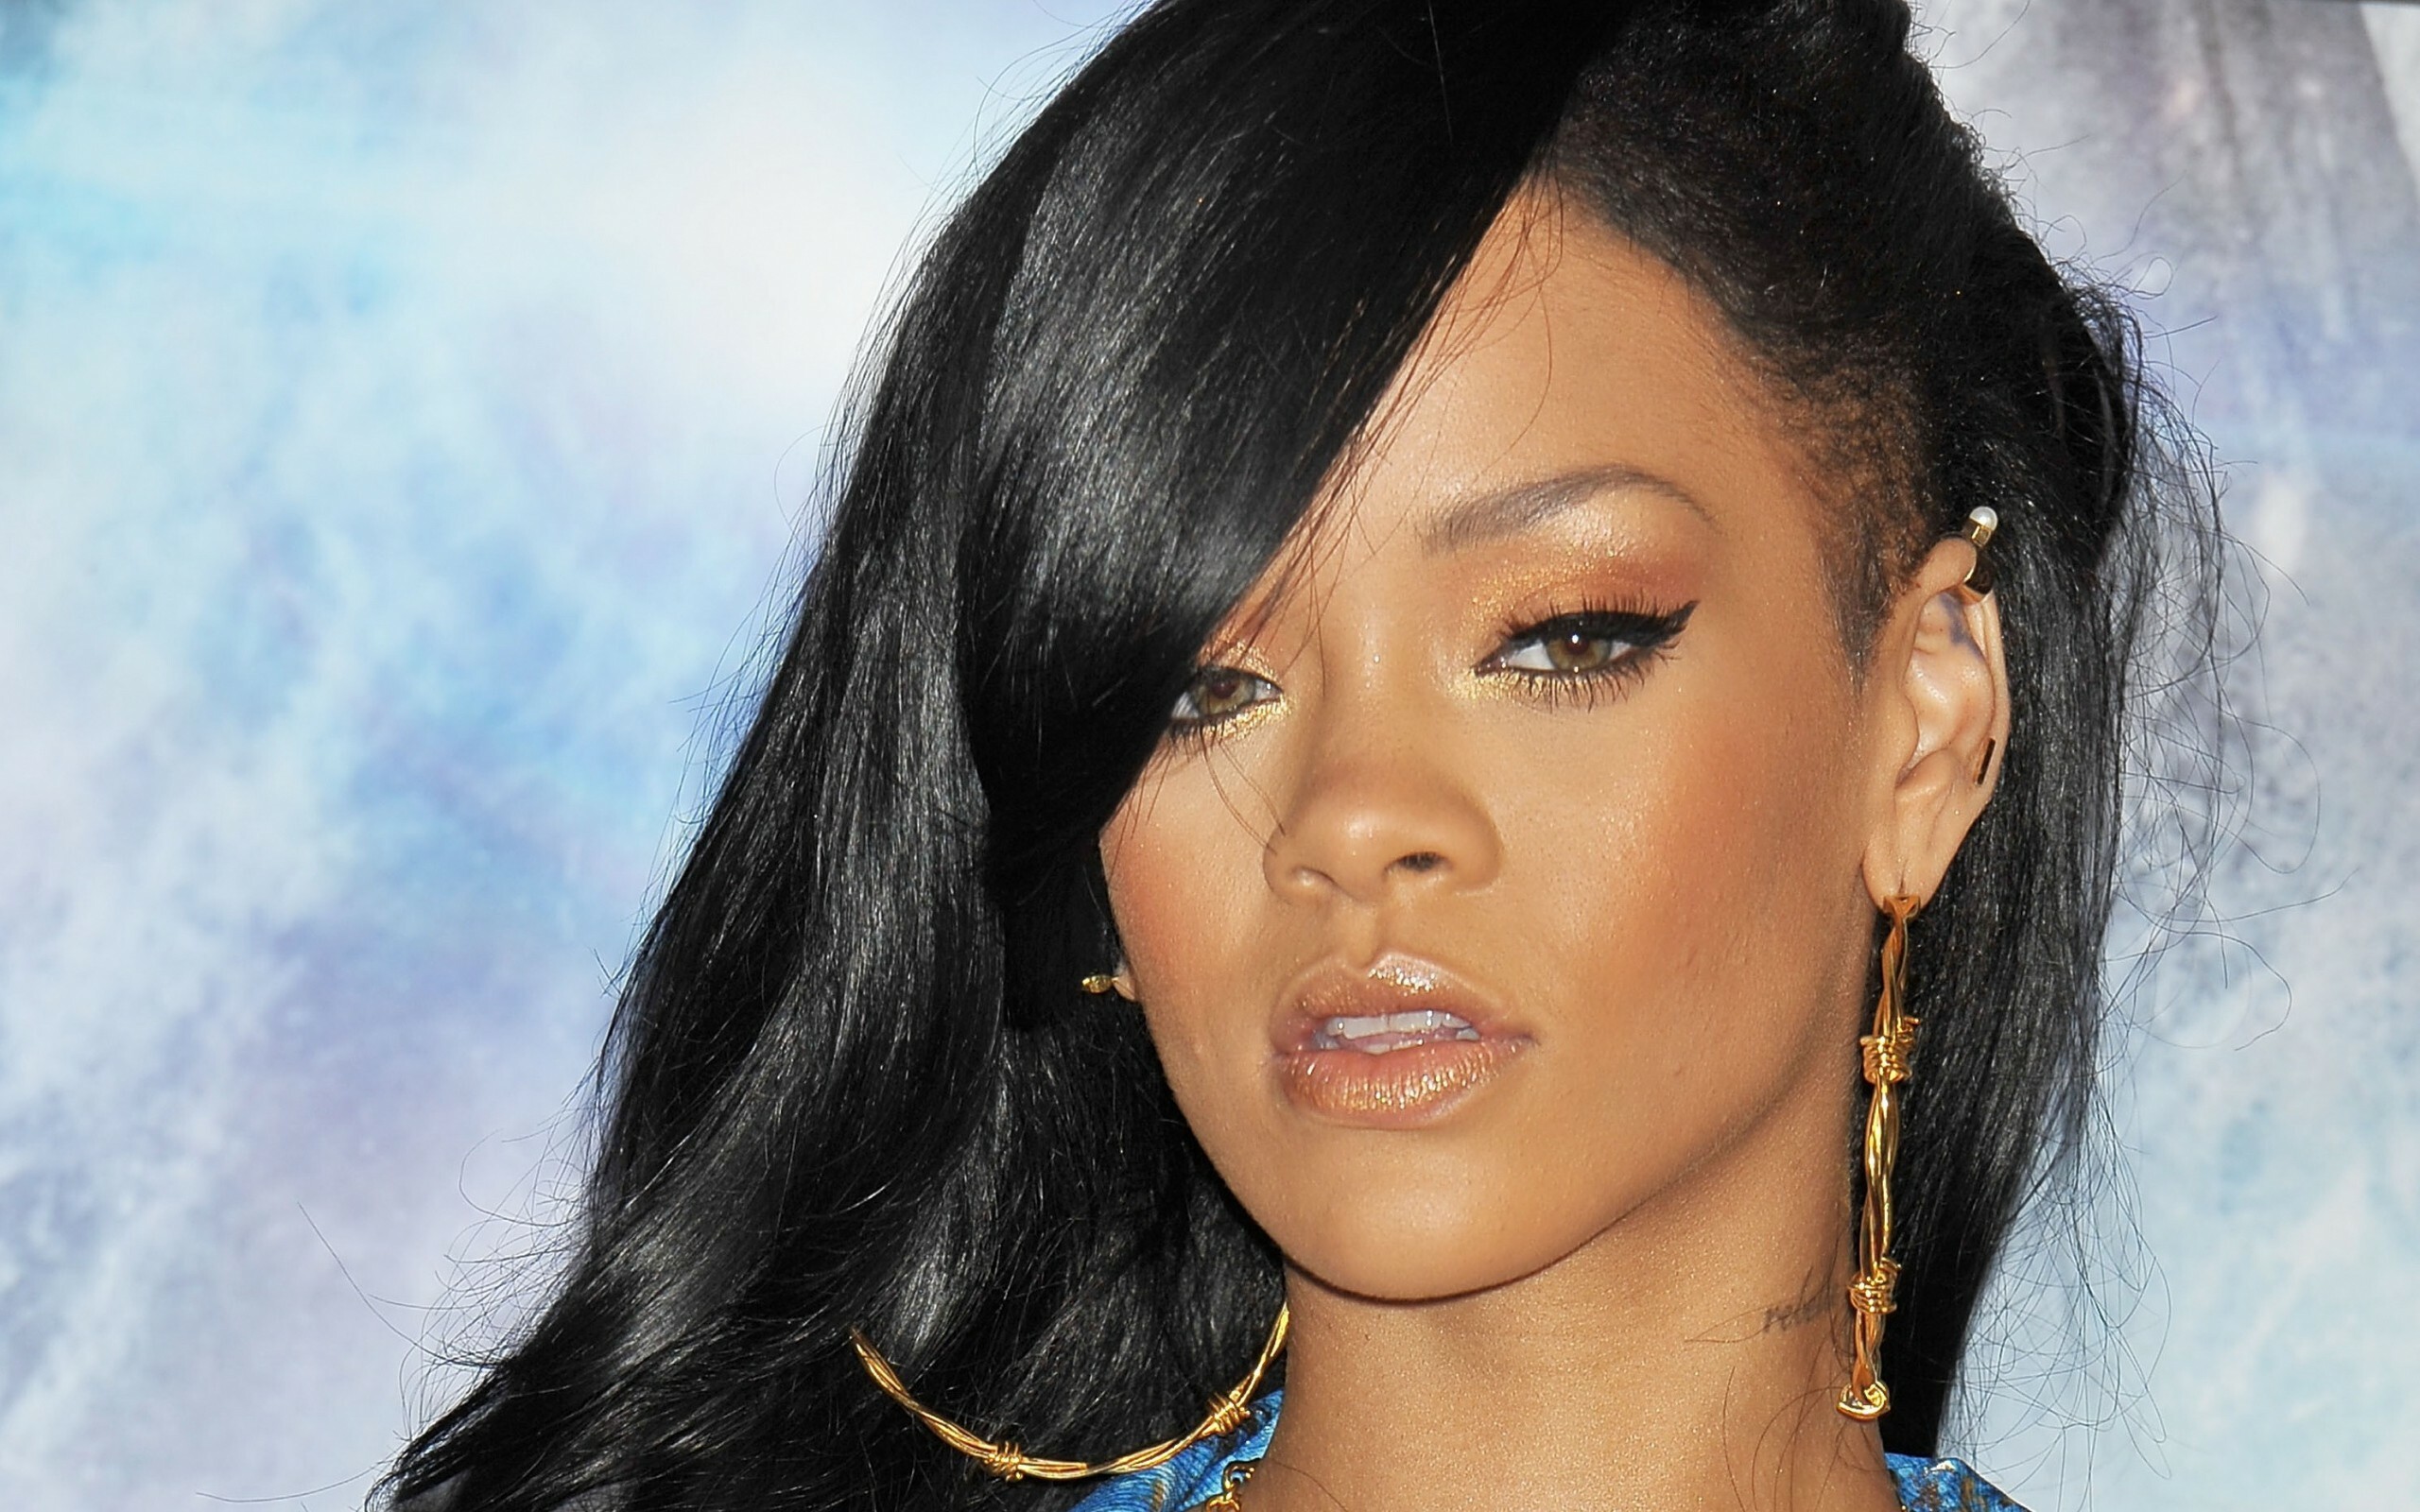 Rihanna: Singer, Ranked among the top ten highest-paid celebrities in 2012 and 2014, Forbes. 2560x1600 HD Wallpaper.